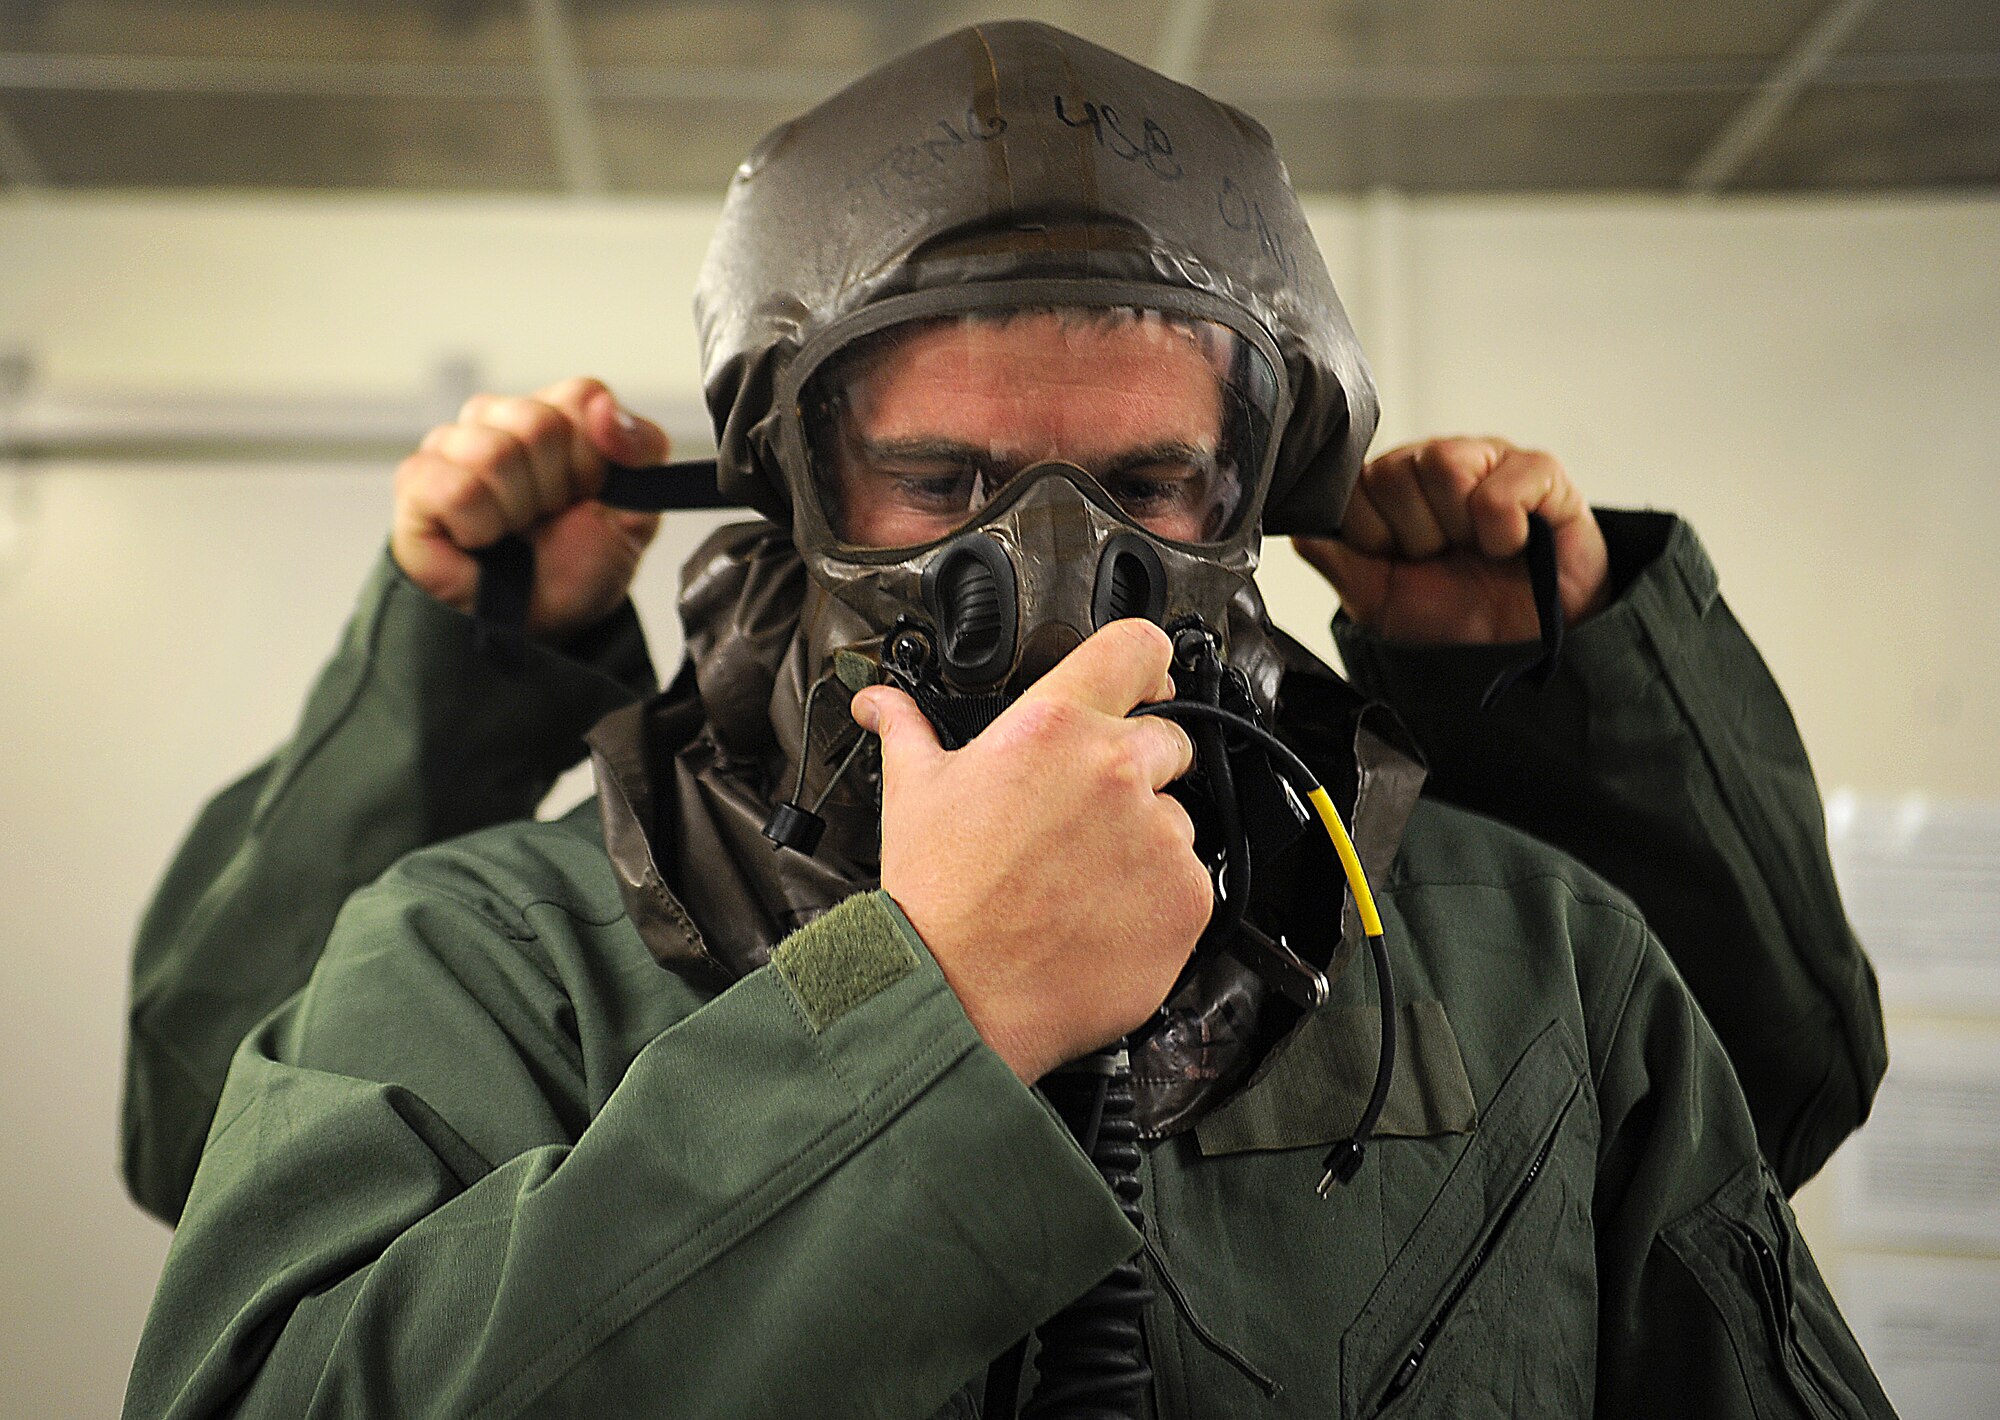 First Lt. Cale Lamoreux, 25th Fighter Squadron pilot, dons Aircrew Eye and Respiratory Protection equipment during Operational Readiness Exercise Beverly Midnight 13-03, at Osan Air Base, Republic of Korea, Aug. 5, 2013. Pilots from the 25th and 36th Fighter Squadrons practice wearing the AERP equipment during OREs to prepare themselves for a potential chemical, biological or radiological environment. (U.S. Air Force photo by Staff Sgt. Sara Csurilla)